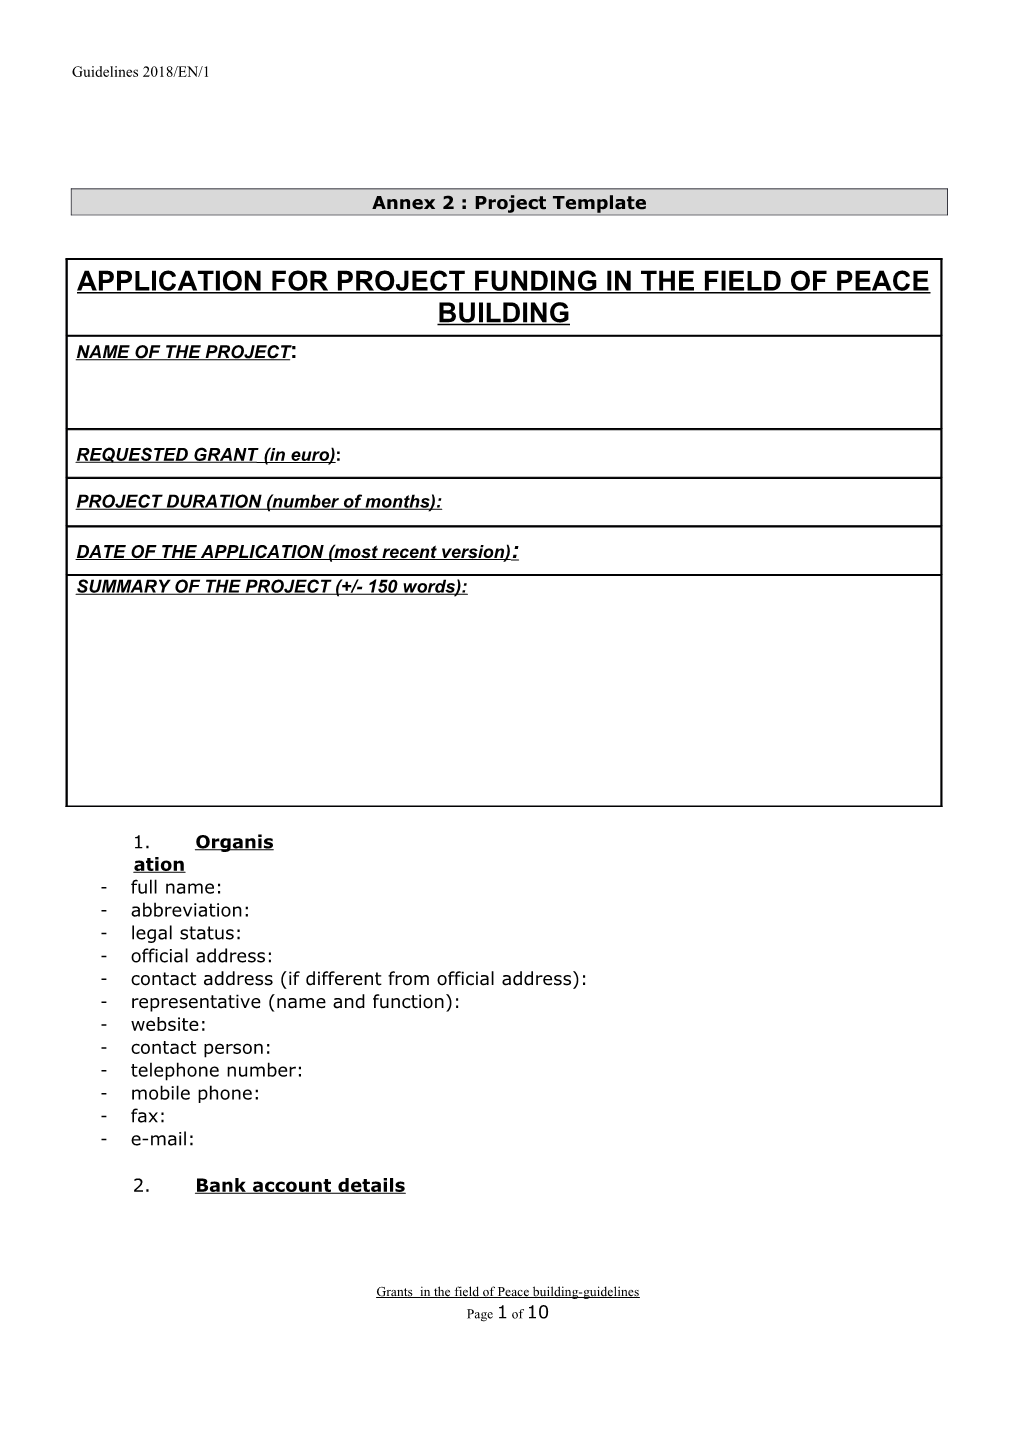 Annex 2 : Project Template